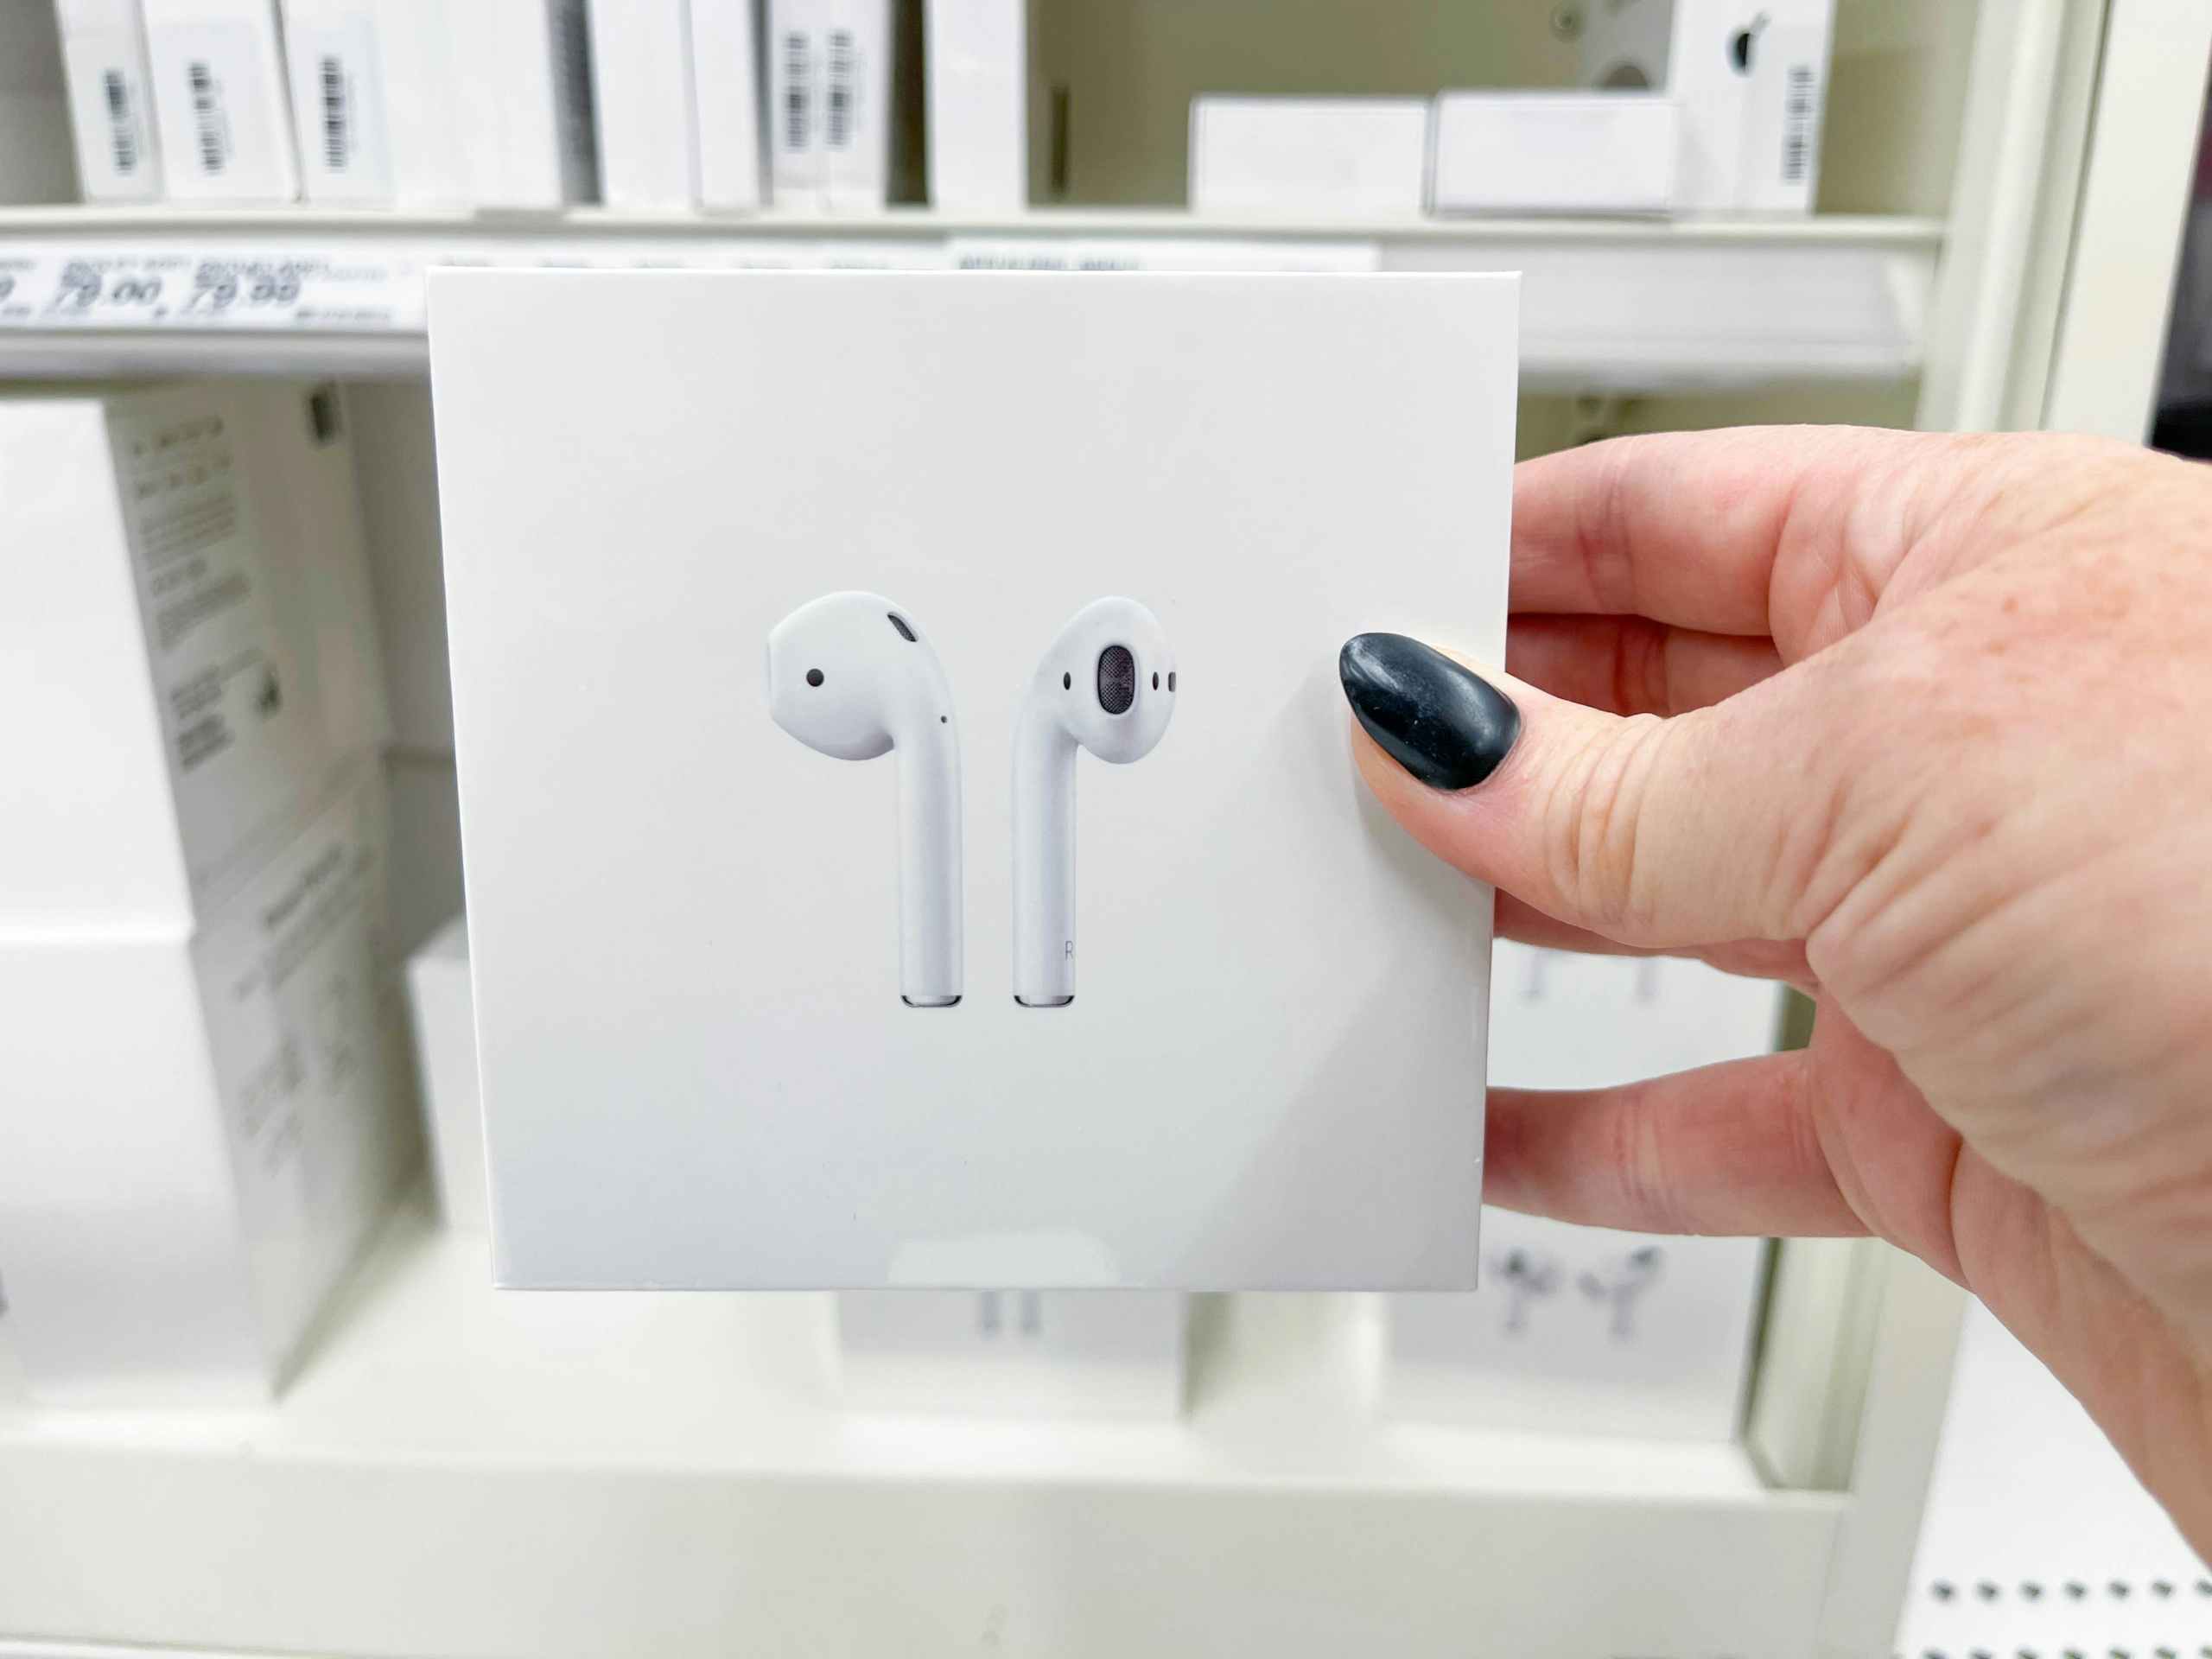 airpods being held